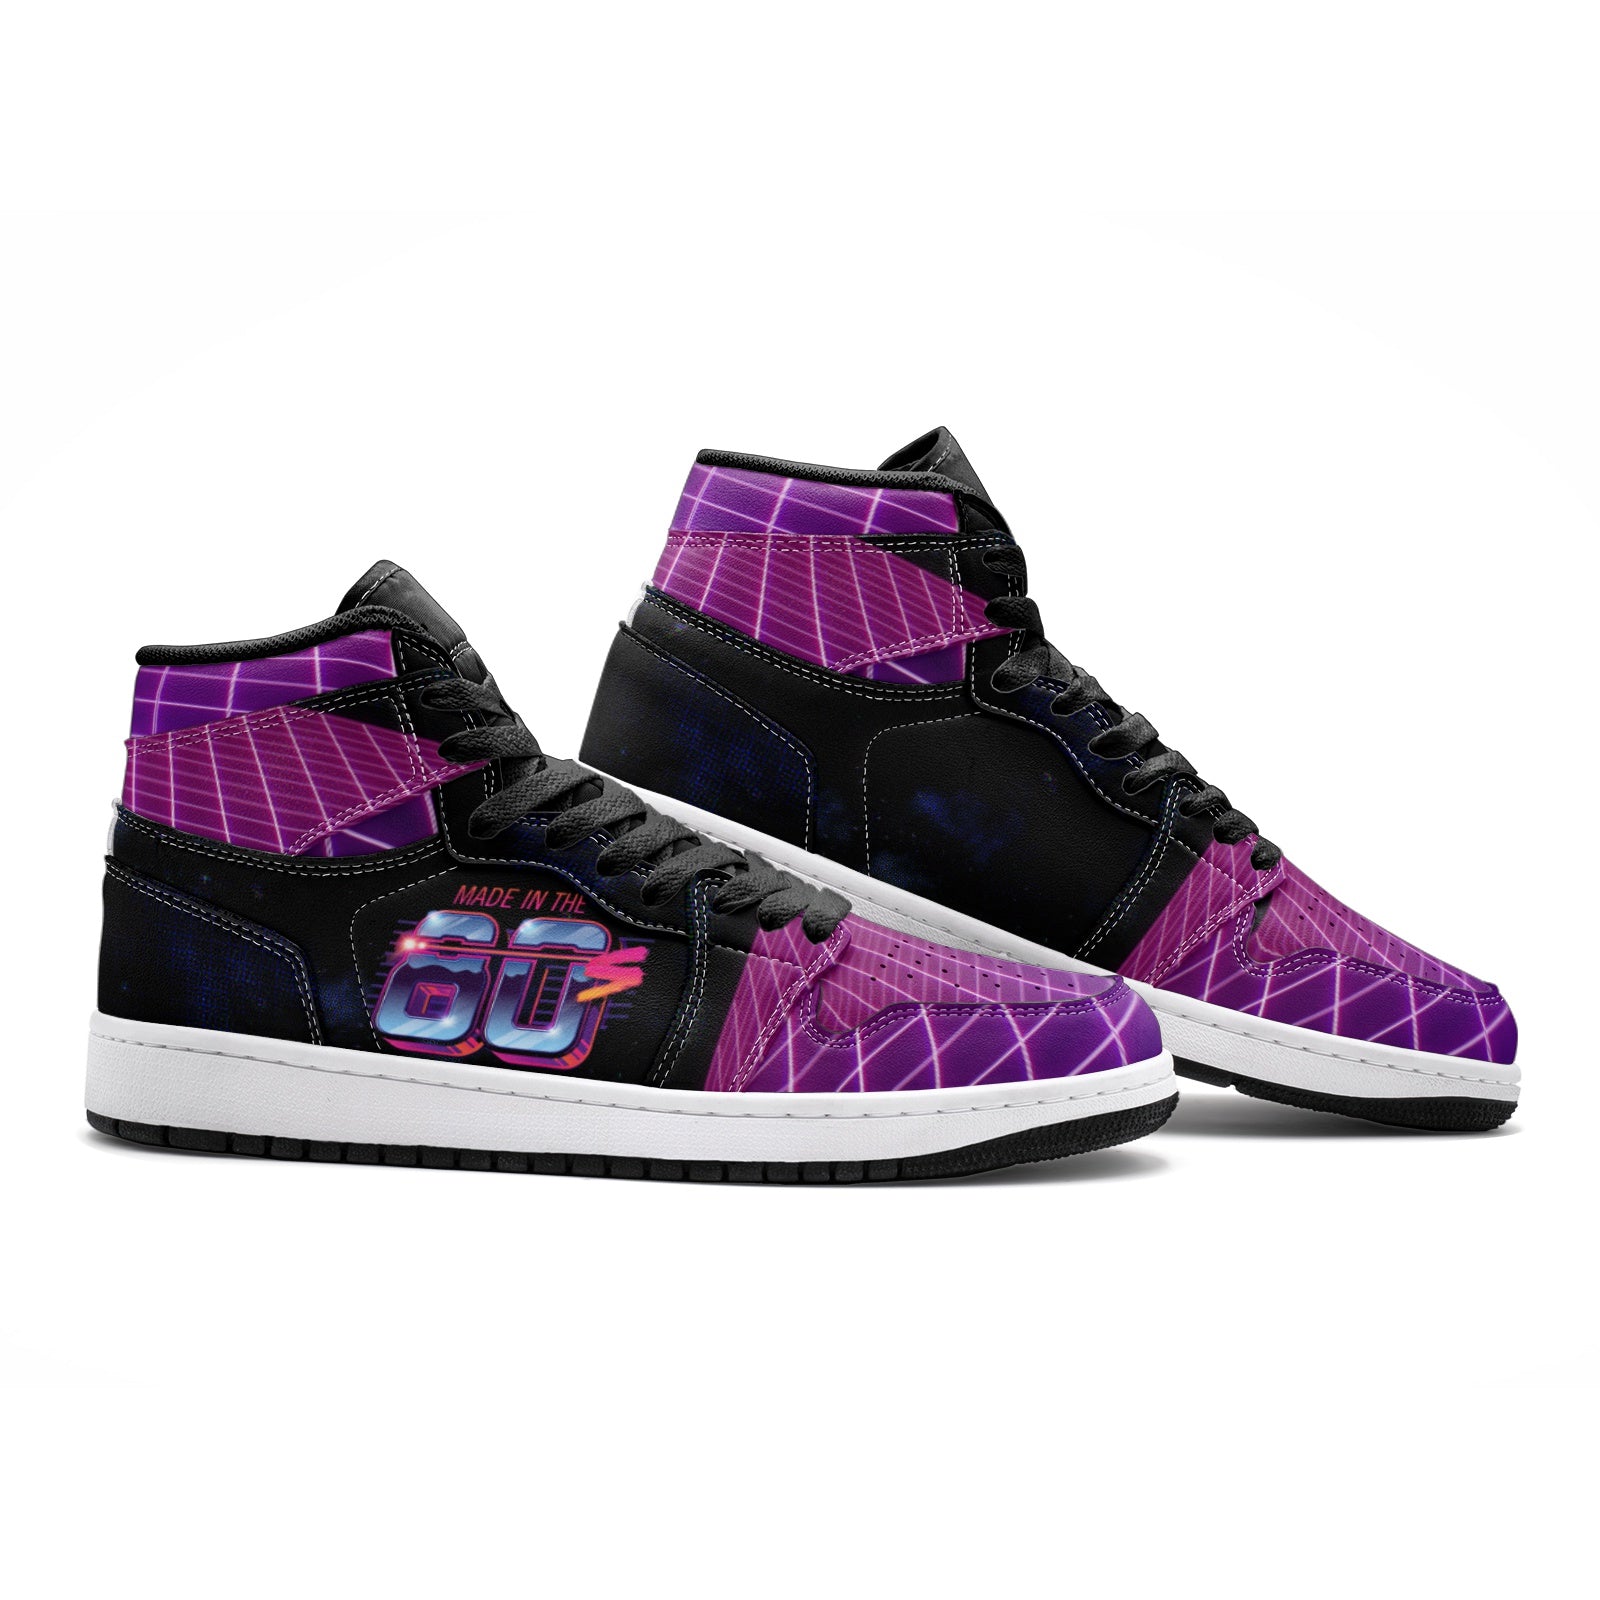 Retro Made In The 80's Unisex High Top Sneaker